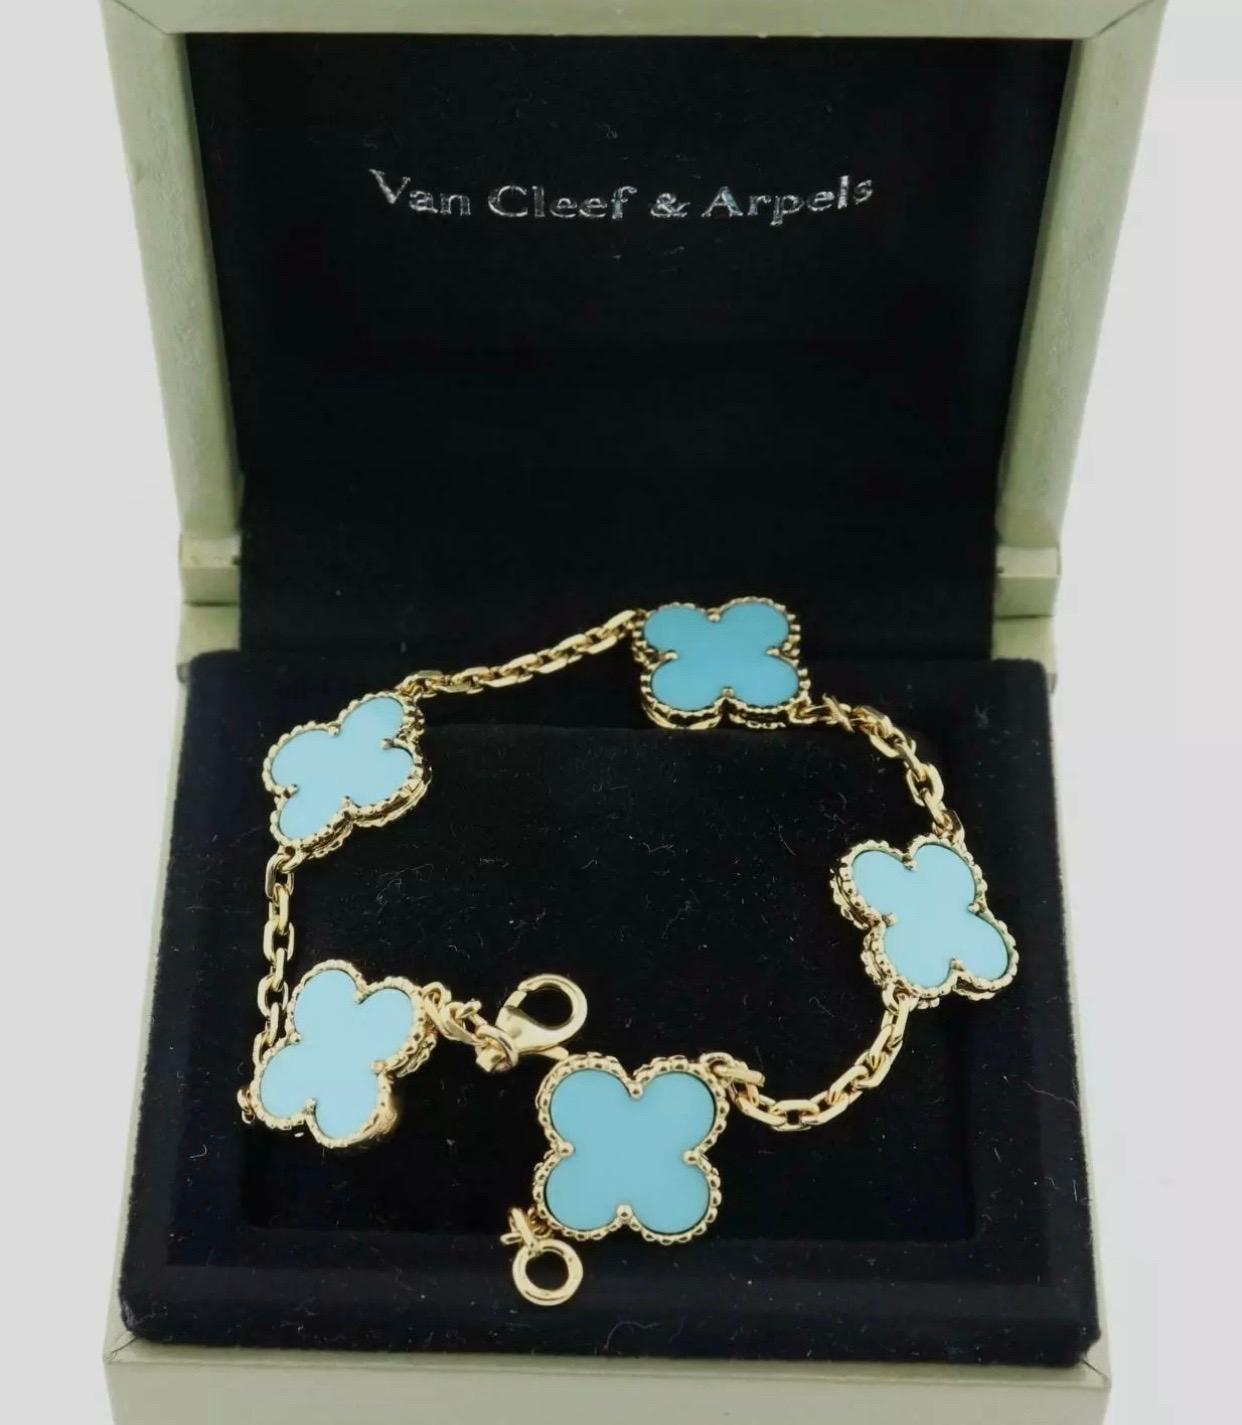 Designer: Van Cleef & Arpels

Collection: Vintage Alhambra

Metal: Yellow Gold

Metal Purity: 18k

Stone: Turquoise

Length (inches): 7.5

Signature: VCA

Hallmark: 750 Serial Number (blocked for privacy)

